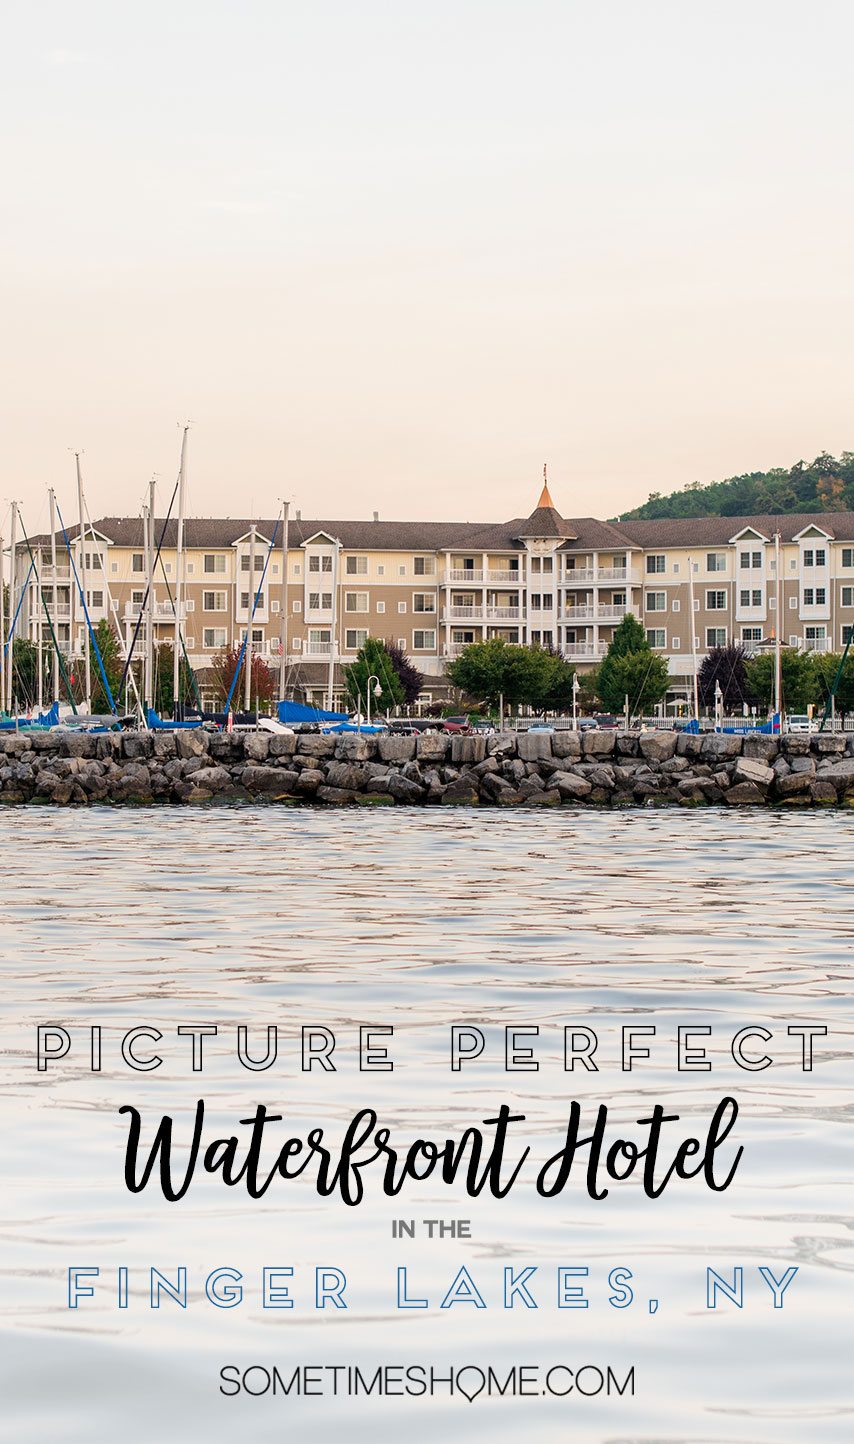 Looking for Hotels in the Finger Lakes area of New York? We share where to stay for a weekend getaway or road trip to the area. This waterfront lodging will be perfect for your vacation, as it's very close to many things to do, from wineries, to Watkins Glen State Park with its beautiful waterfalls, to Seneca Lake. Click through for a review of the Harbor Hotel in Watkins Glen, with detailed photos and information for this picturesque hotel. #FingerLakes #WatkinsGlenStatePark